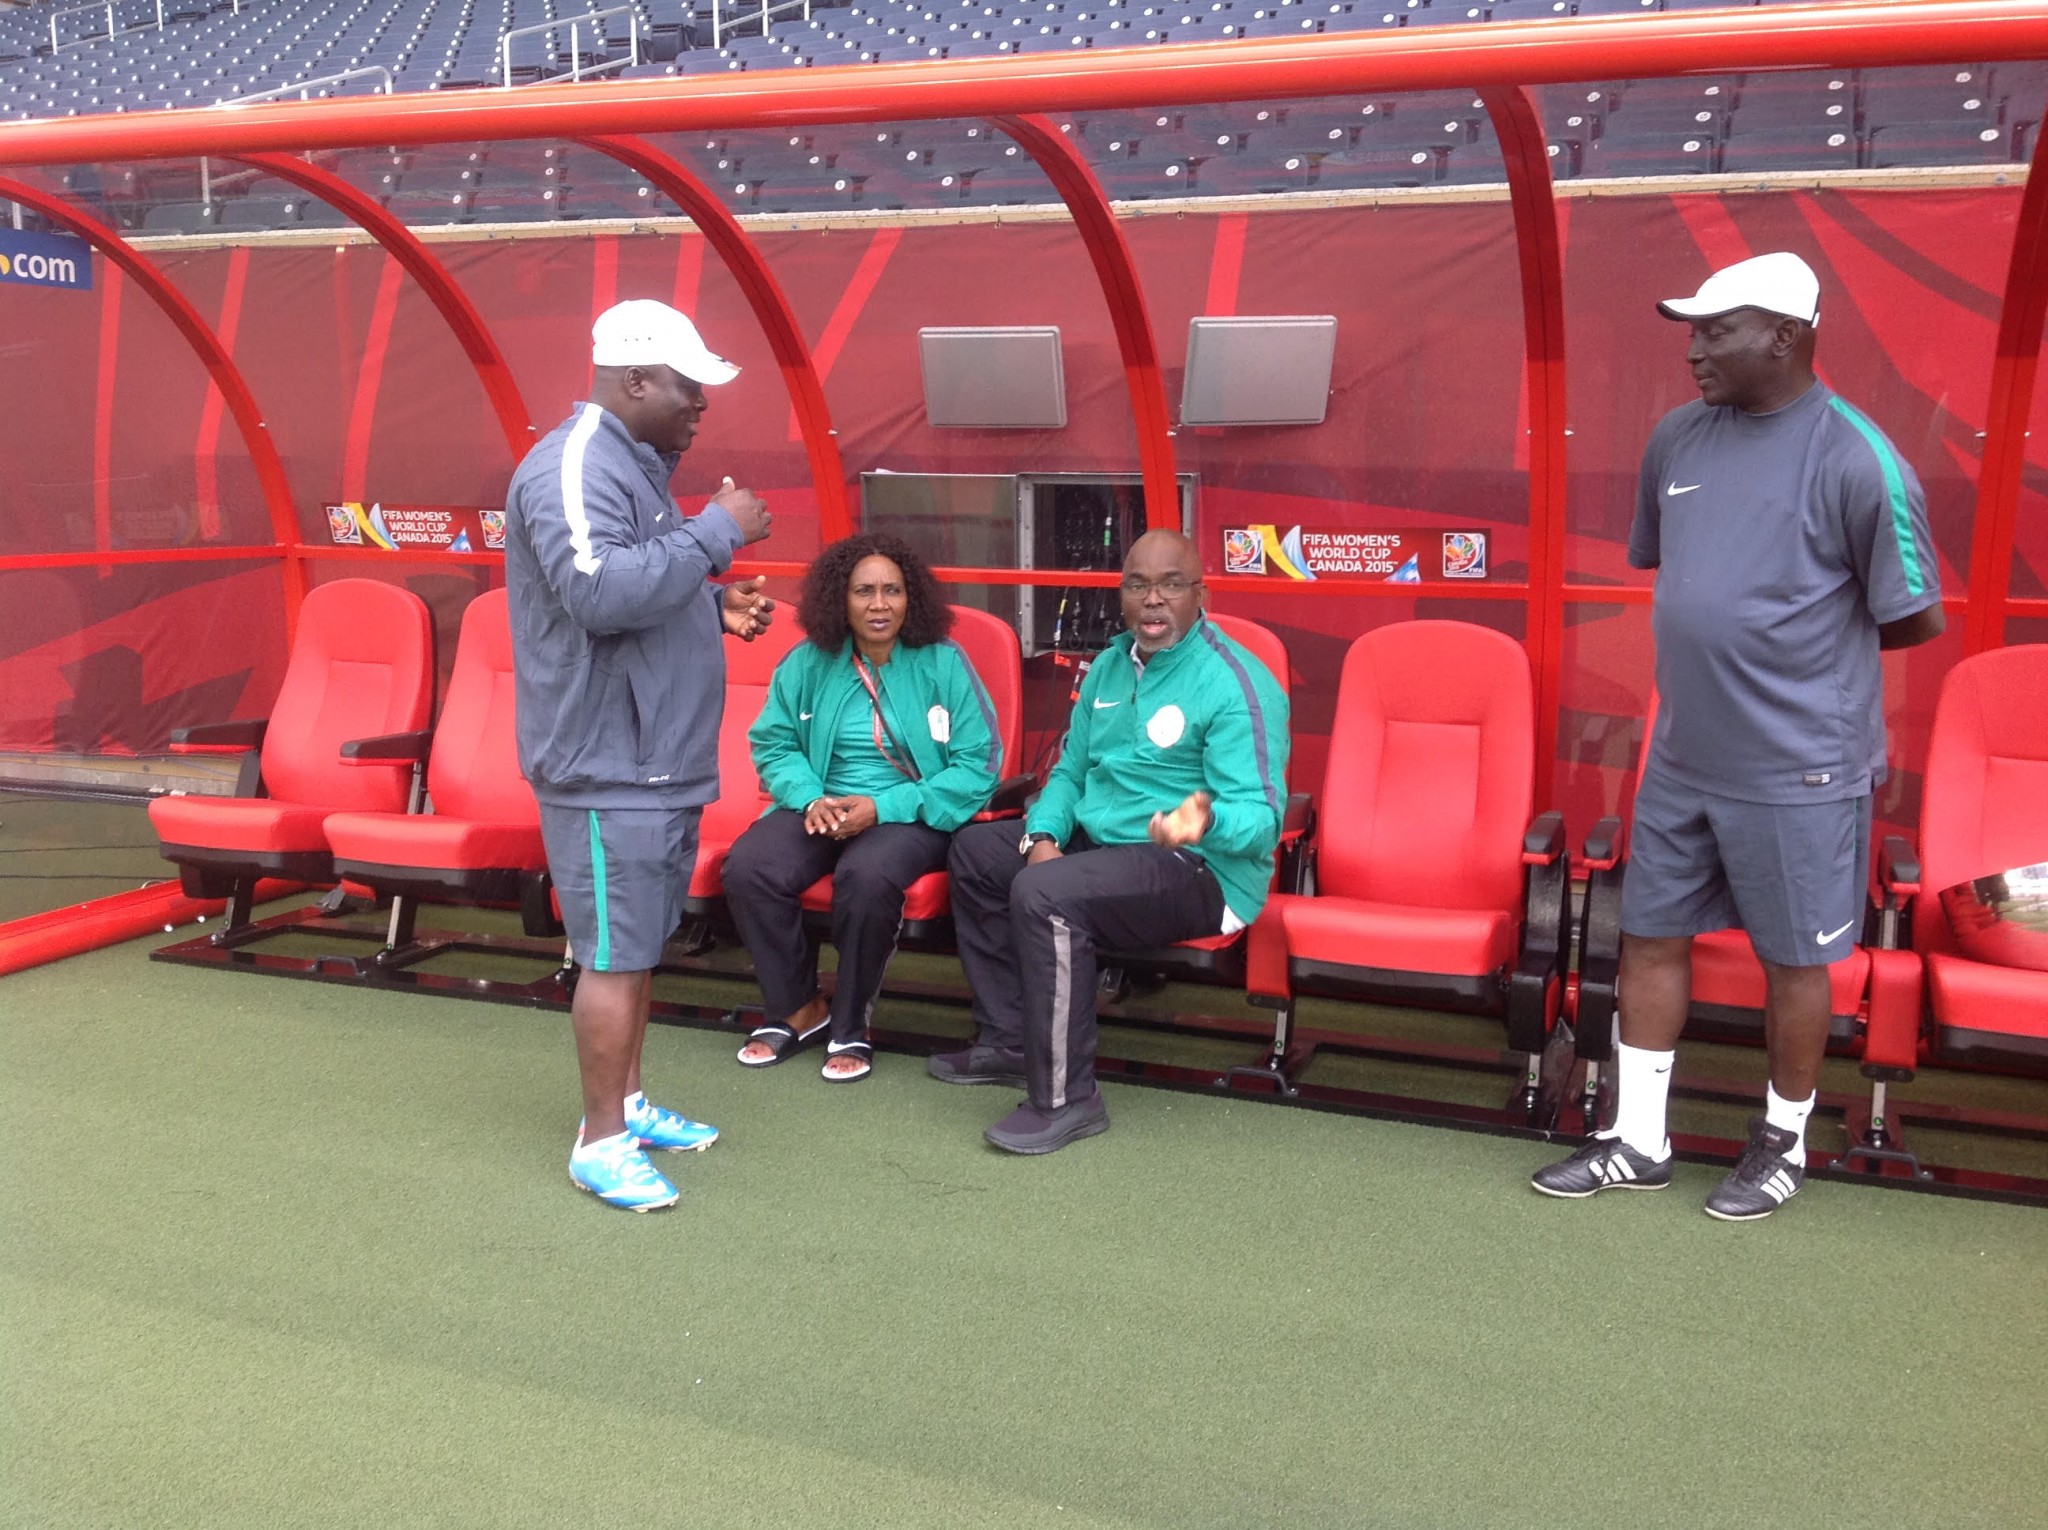 Pinnick: Falcons, this is your time to conquer!